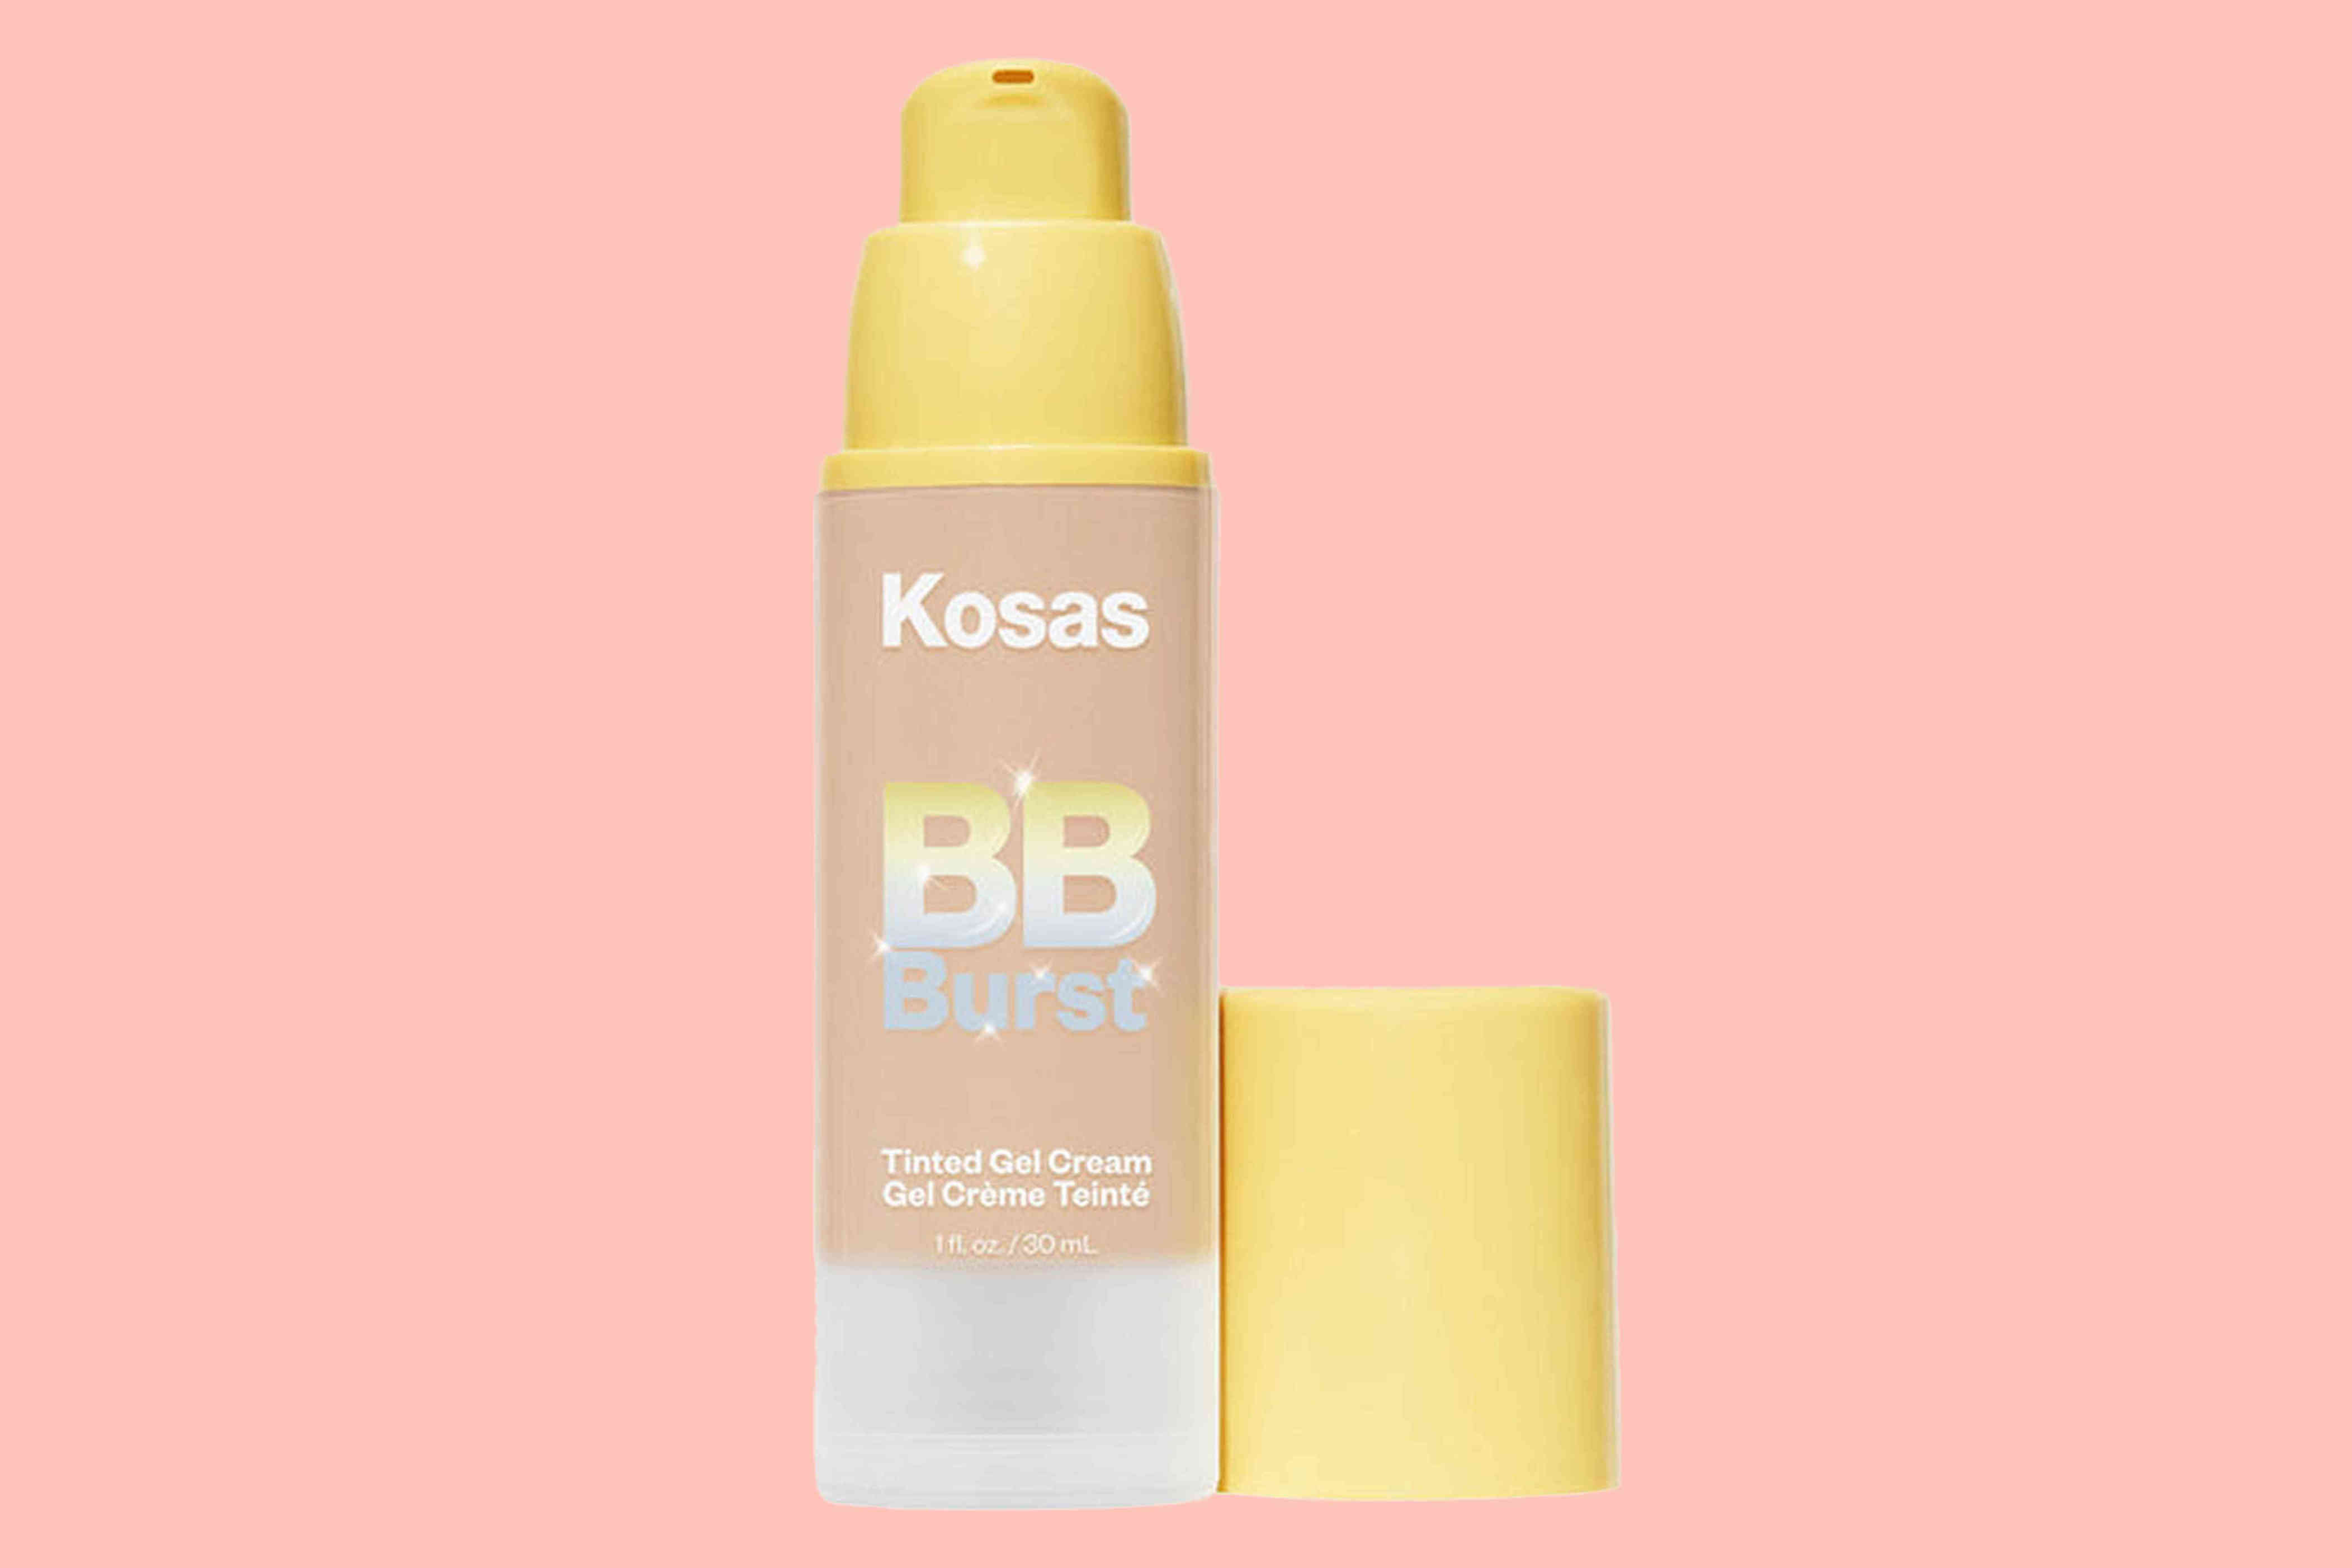 kosas' new bb burst cream is the complexion perfector my 'no-makeup' makeup routine was missing